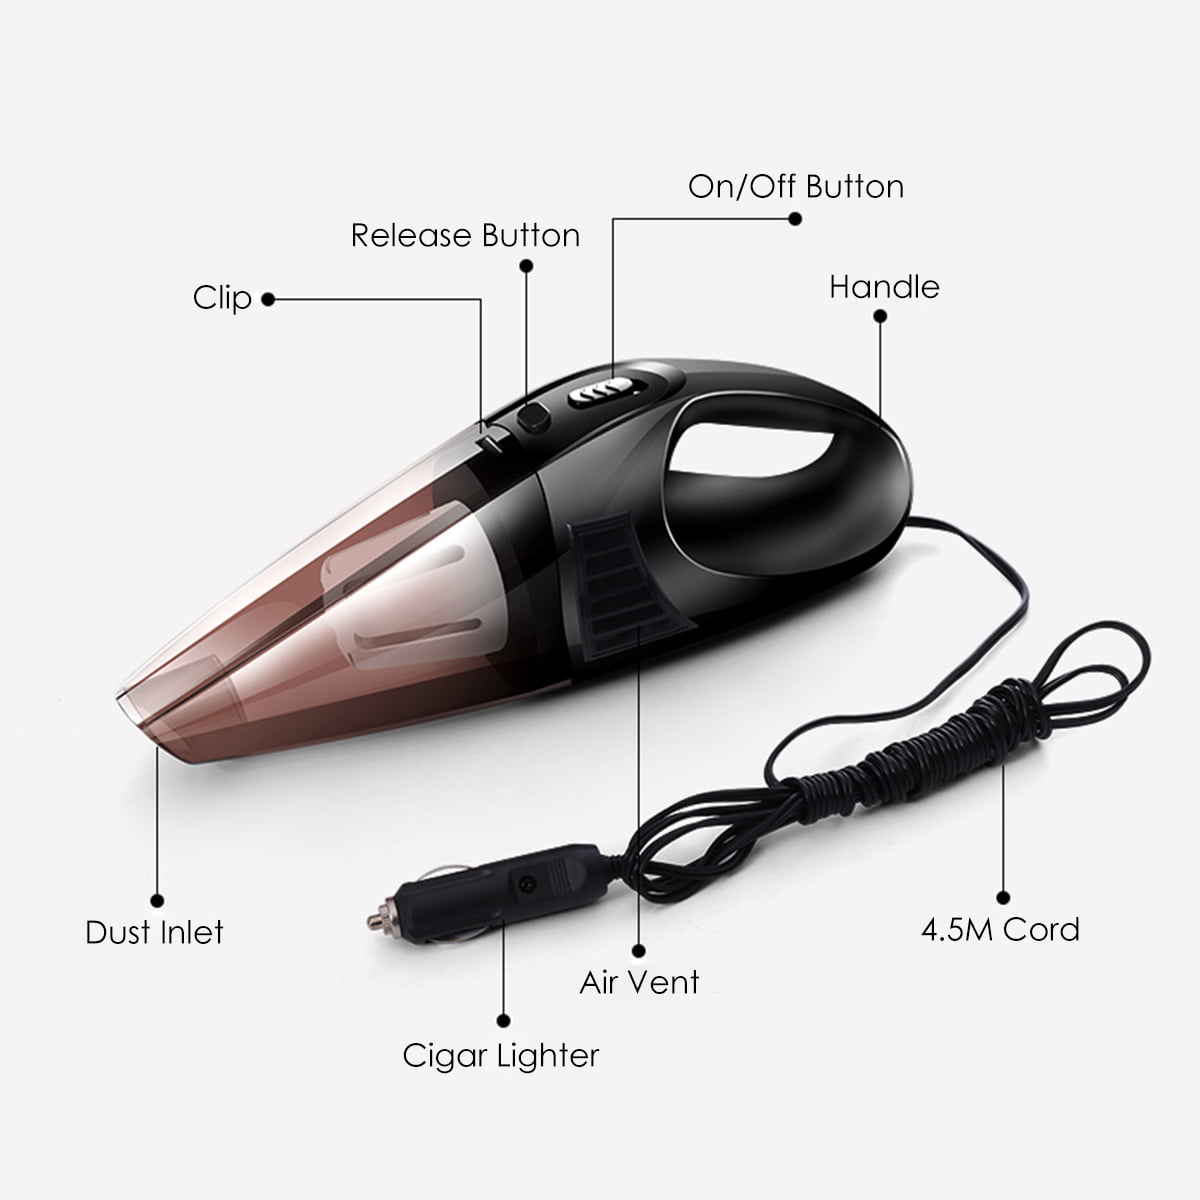 Car Vacuum Cleaner 120W High-power 24V Truck Wet And Dry Dual-use Handheld Power Cord Length 5 Meters Or So Host Size 34x11x10cm 